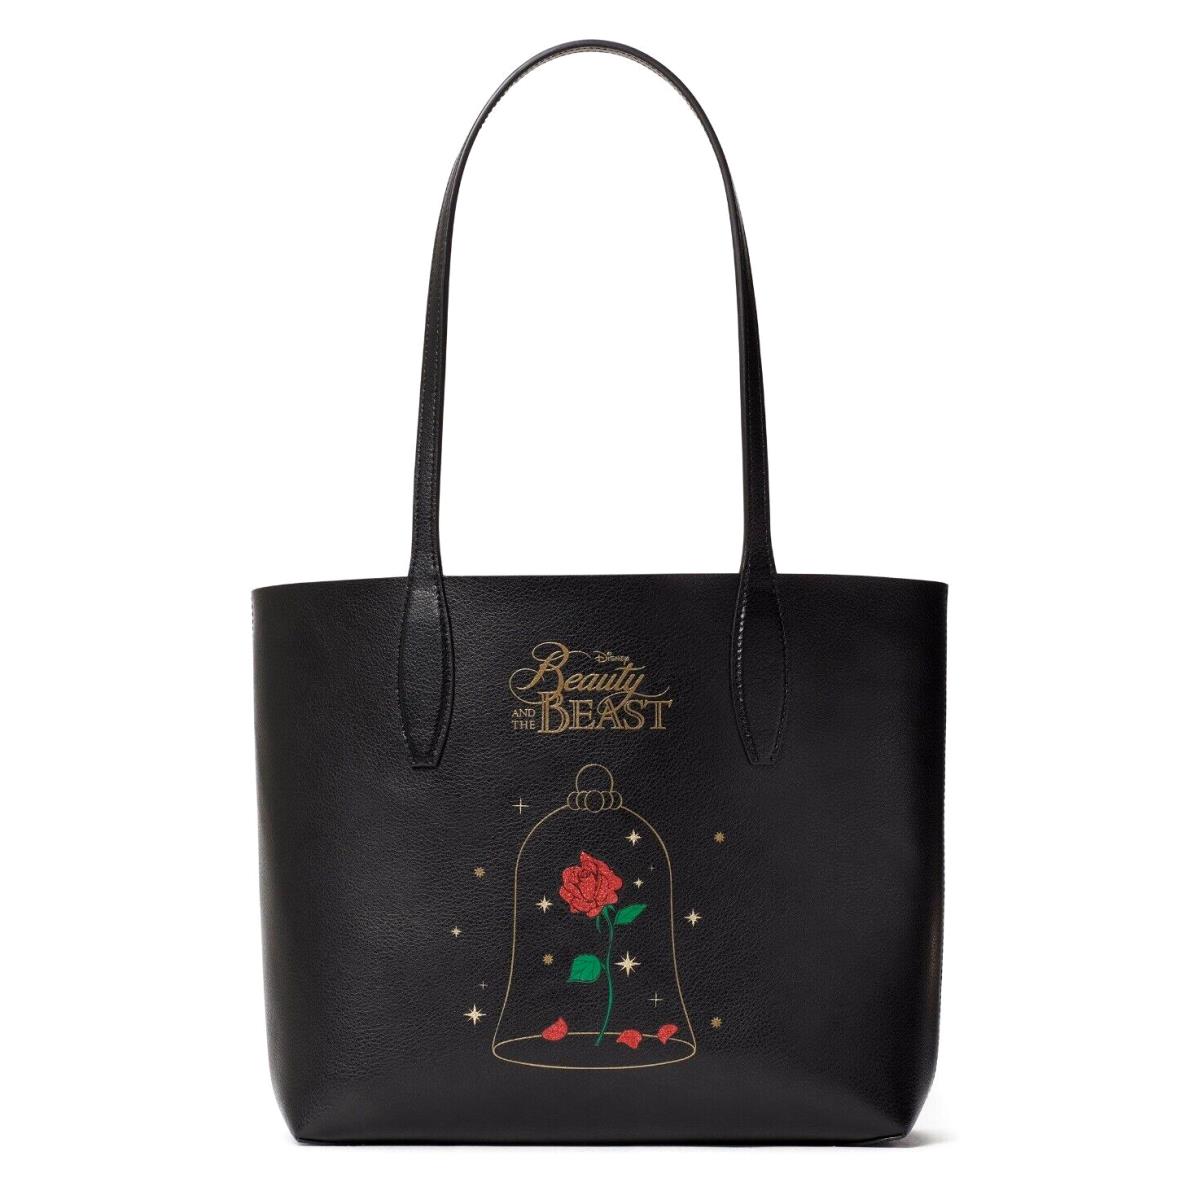 New Disney x Kate Spade Beauty and The Beast Small Reversible Tote with Pouch